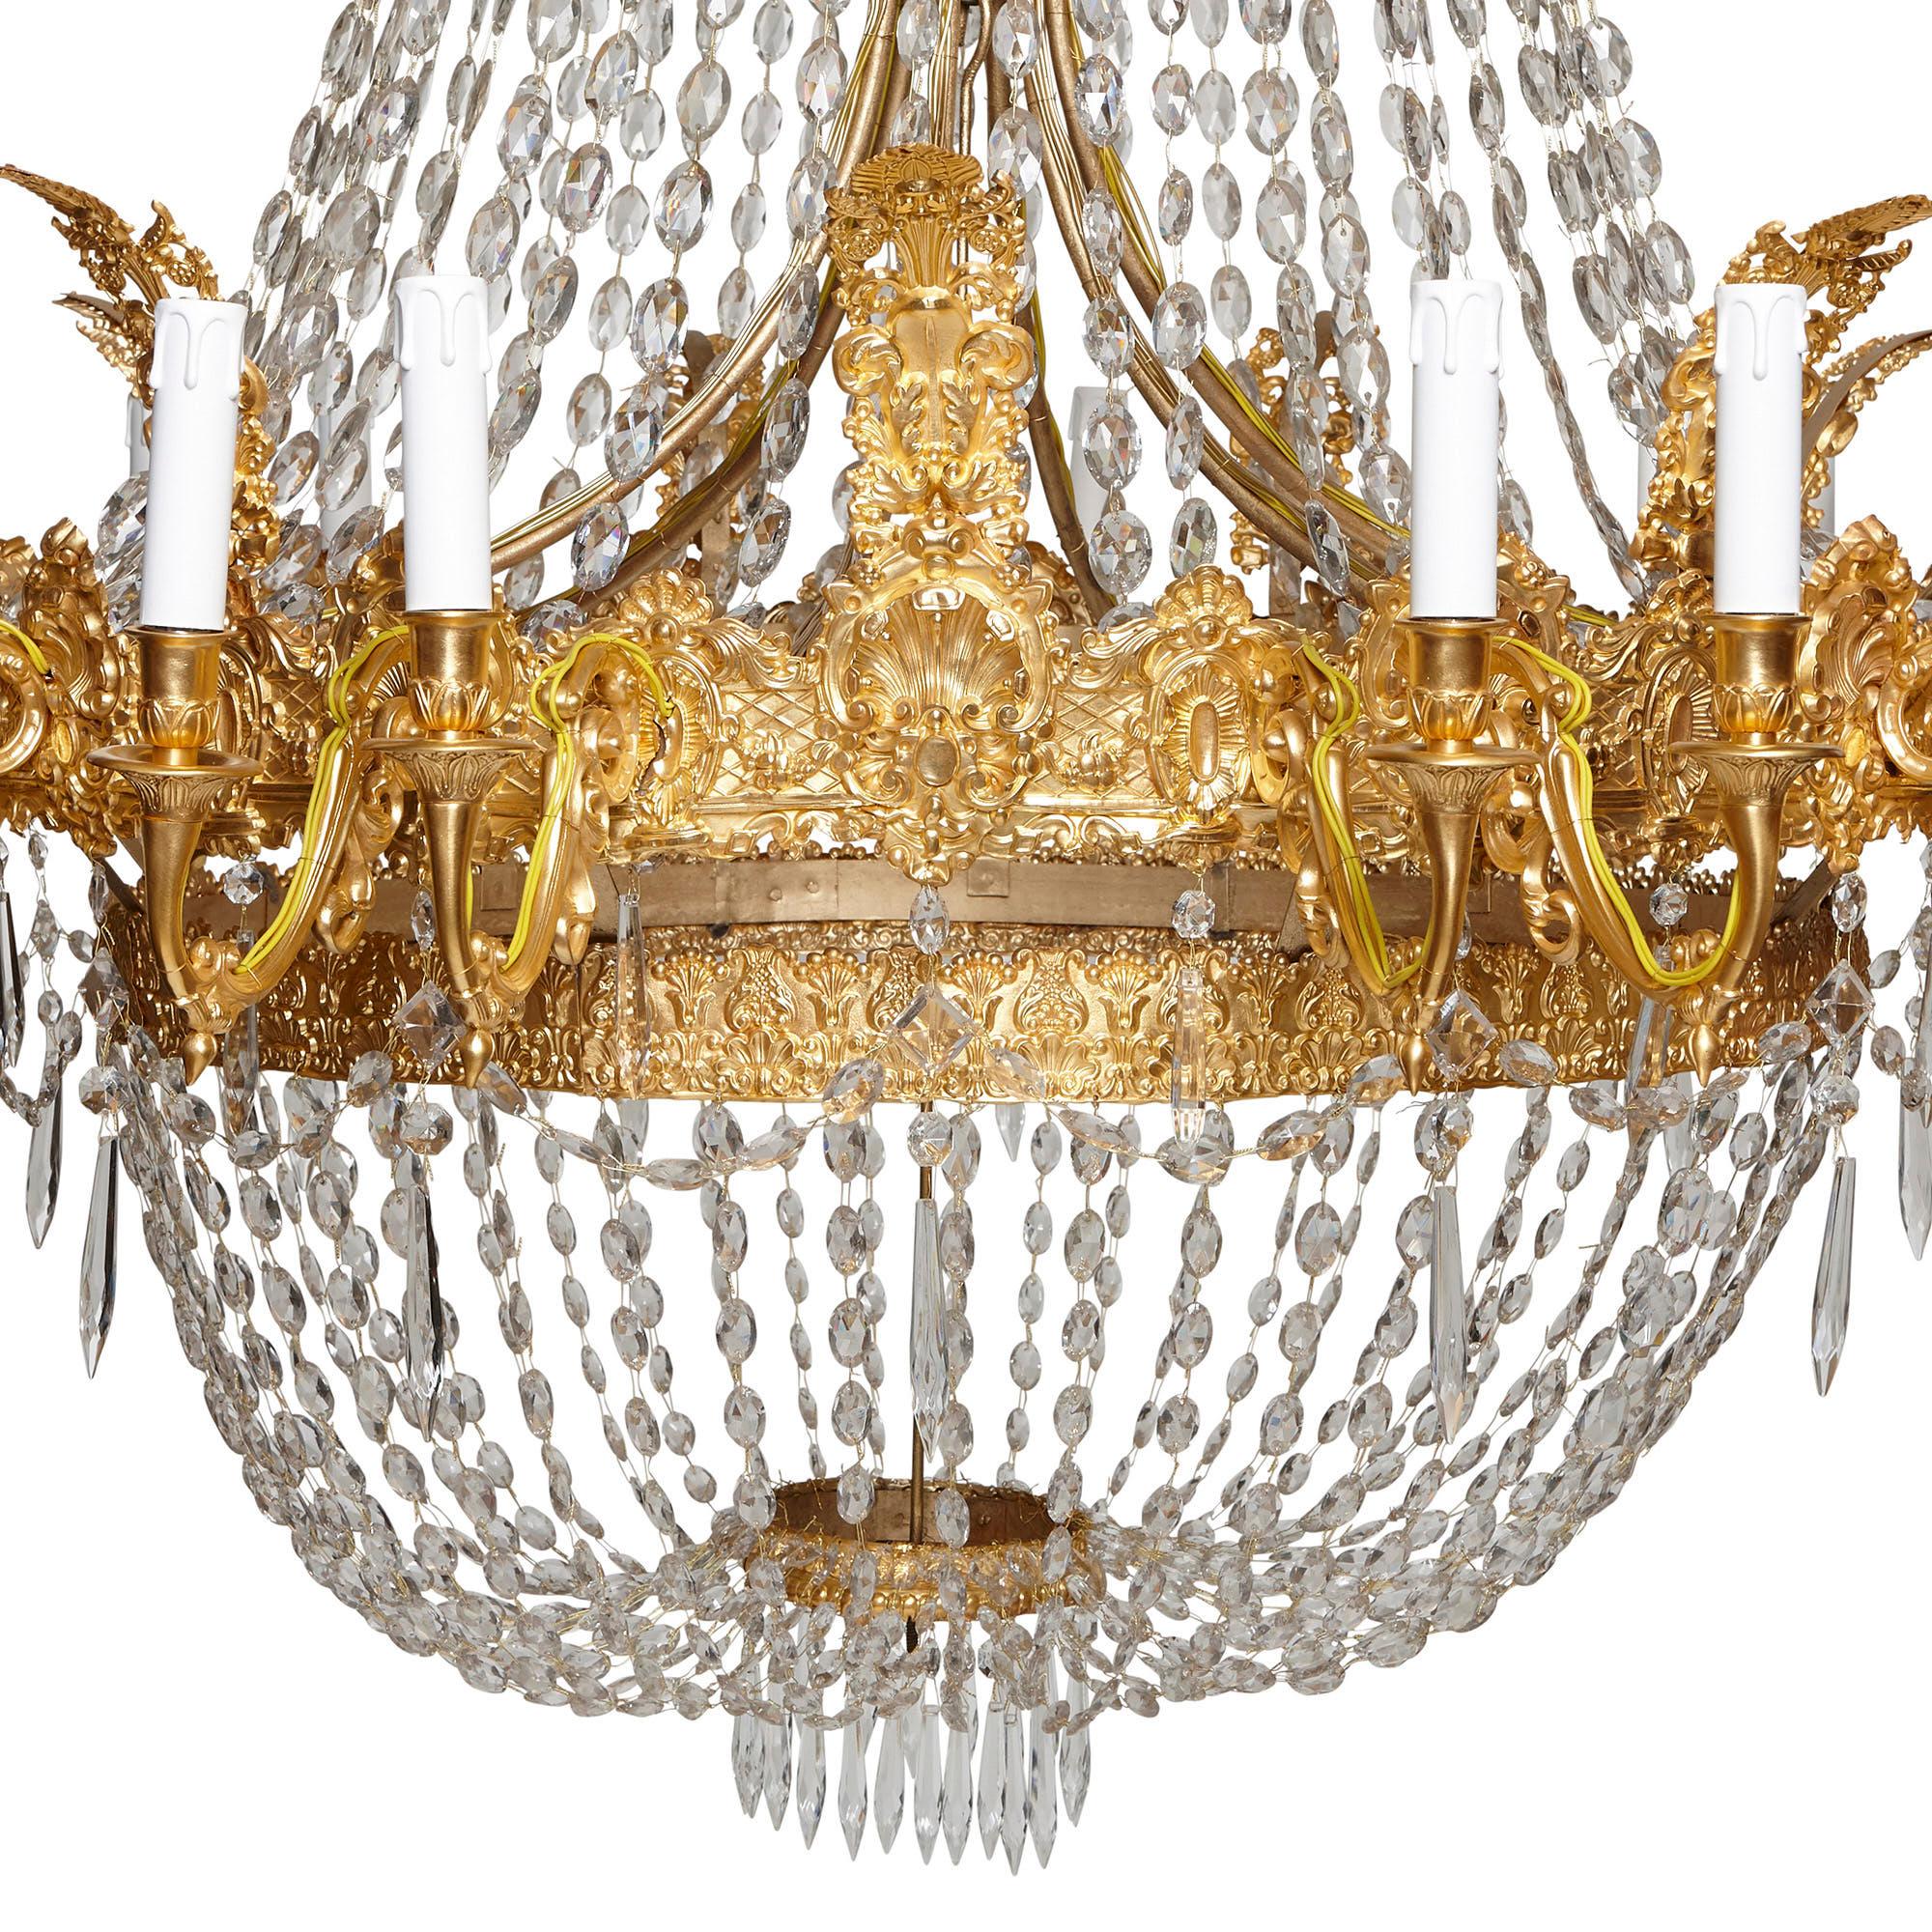 This 19th century French chandelier is designed in the Empire style and wrought from gilt bronze and strings of cut glass. The chandelier features a lower dome-shaped body below an overarching tent-shaped canopy. The top of this canopy, which is